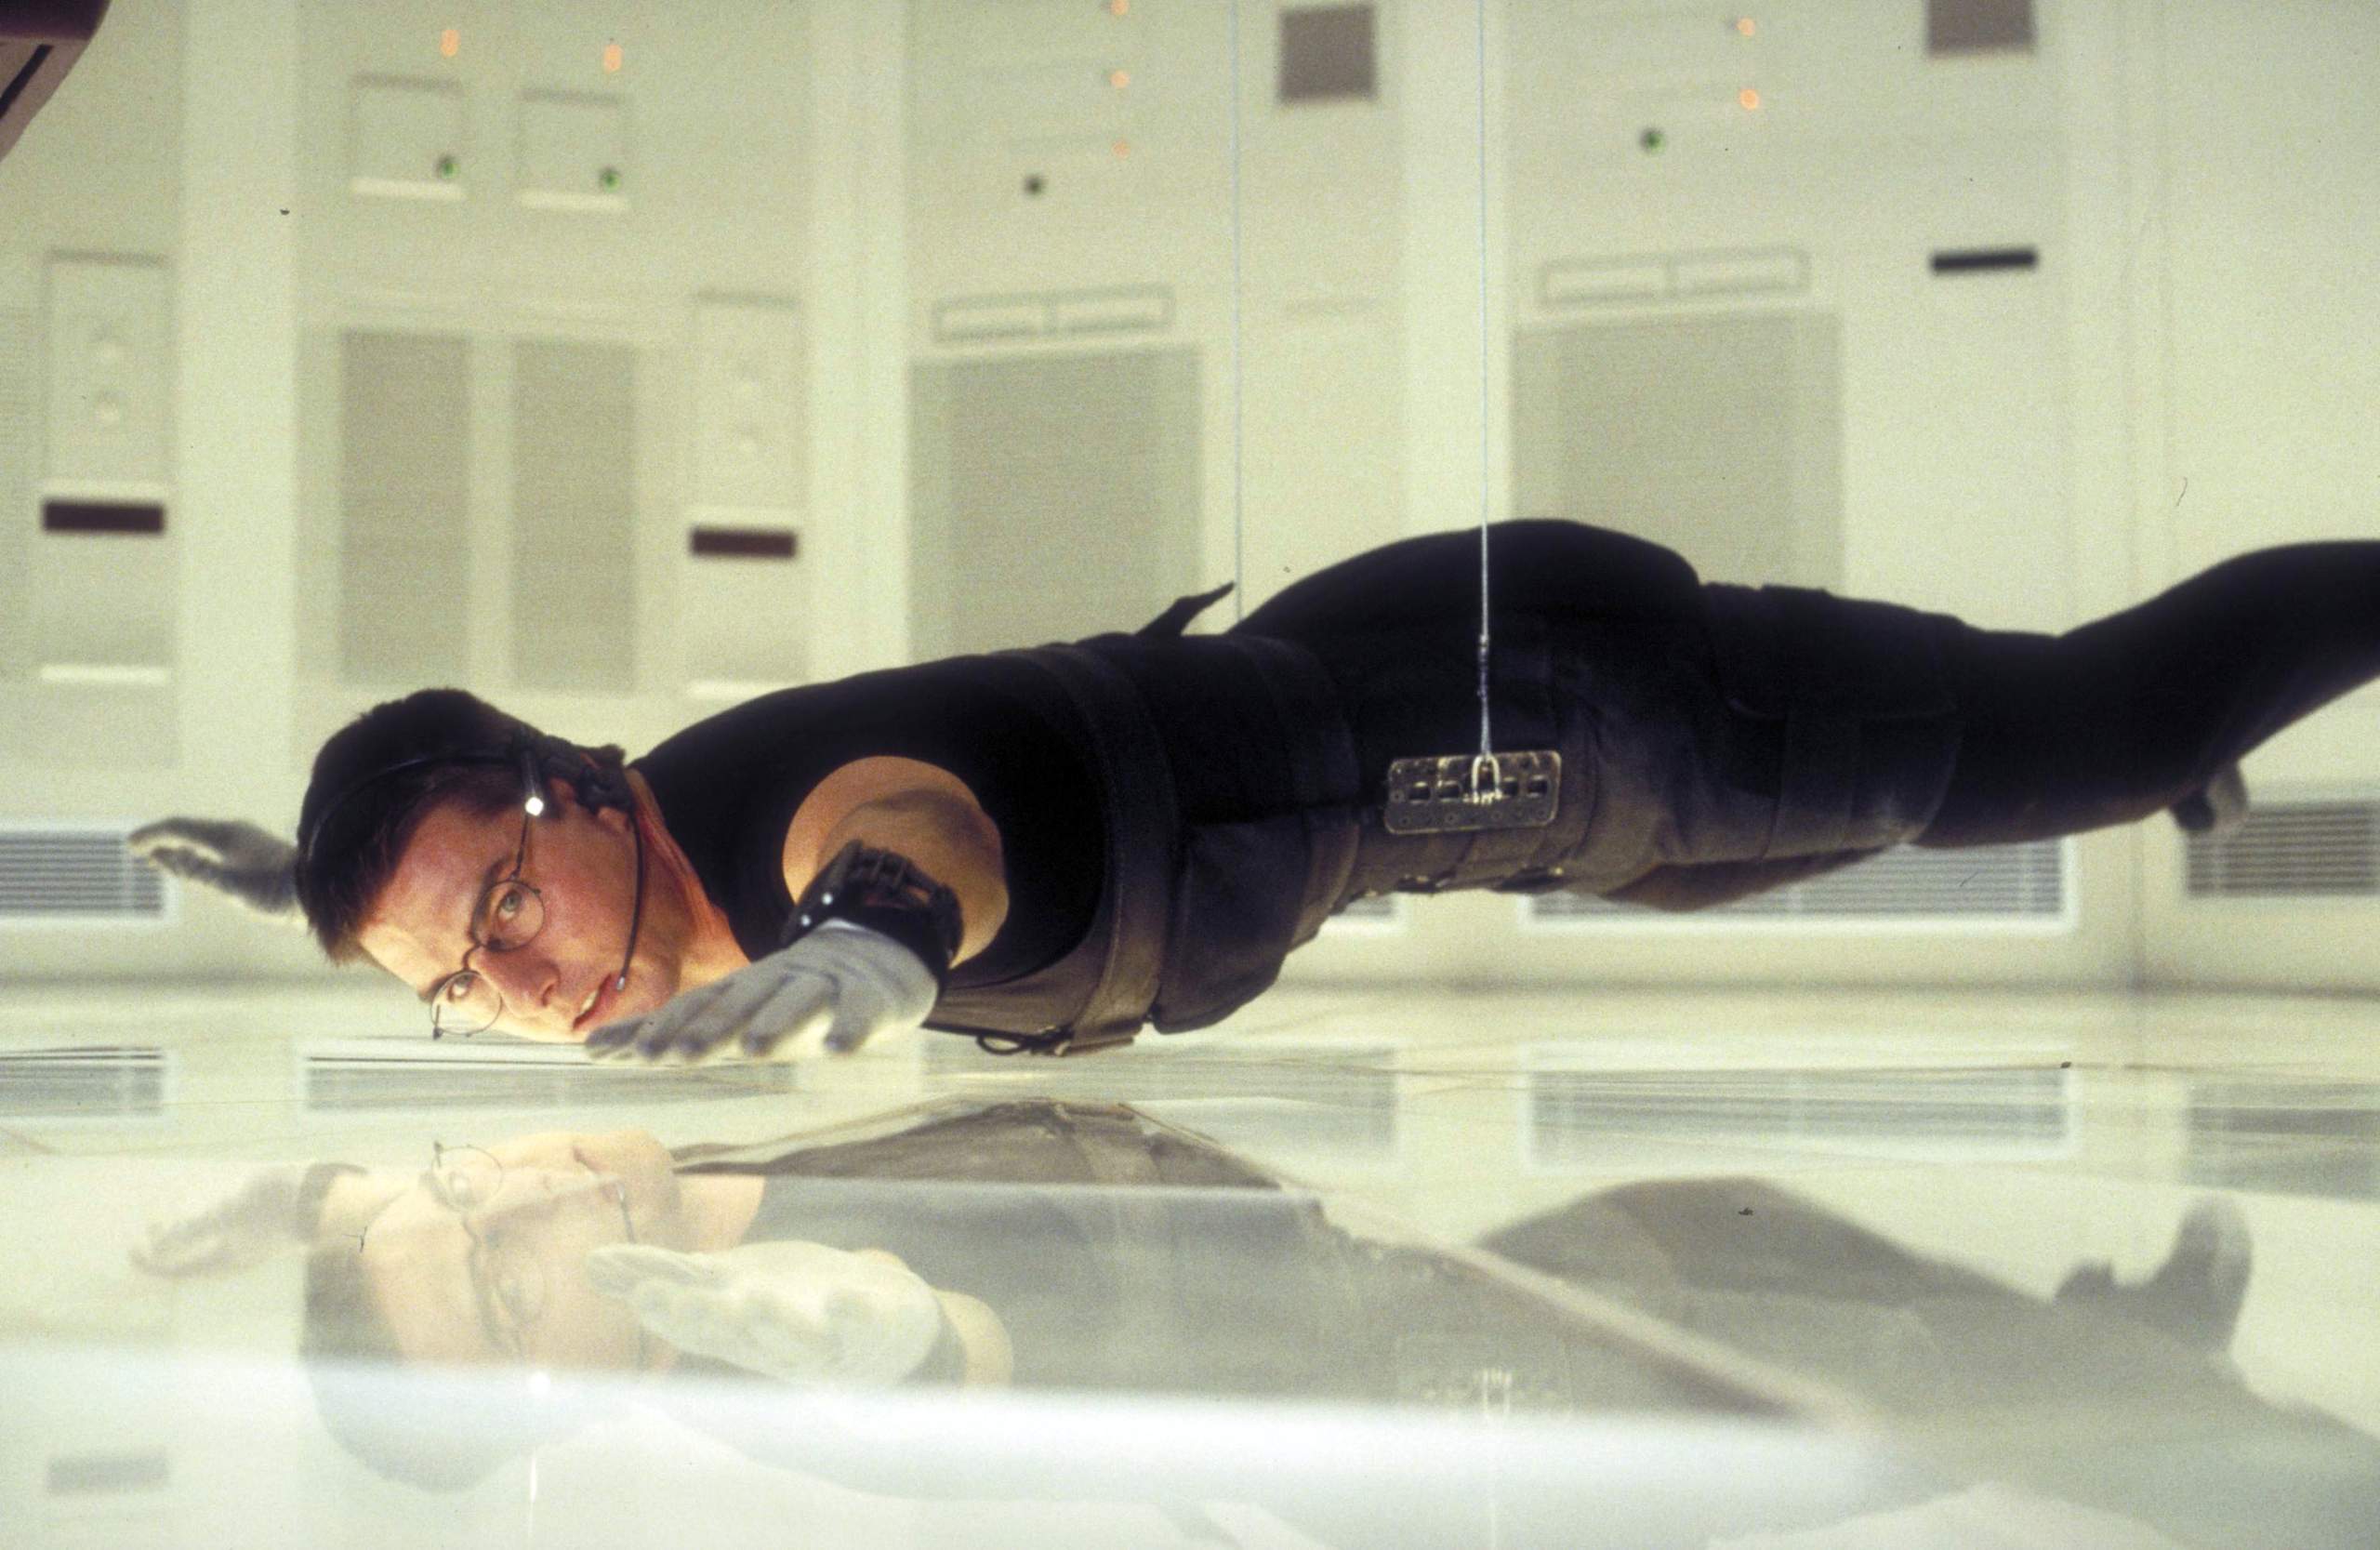 The first <em>Mission: Impossible</em> film isn’t as outrageous as the latter entries. The set pieces are smaller, the stakes are lower, and there’s less tech. What it does have, though, is the bold and stylistic direction of Brian De Palma. This <em>Mission: Impossible</em> is less obsessed with having its protagonist jumping off of increasingly tall buildings, and instead focuses on creating tension and paranoia both in the story and its set pieces. Like Ethan Hunt in the film, the audience never knows who to trust. We’re left constantly waiting for the other shoe to drop. The CIA headquarters heist sequence remains the high point of the franchise, even though it's also the series at its quietest and most deliberate. Selfishly, I wish the franchise would return to its slow-burn spycraft roots. The first <em>Mission: Impossible</em> is the best of the franchise and Tom Cruise’s best film.